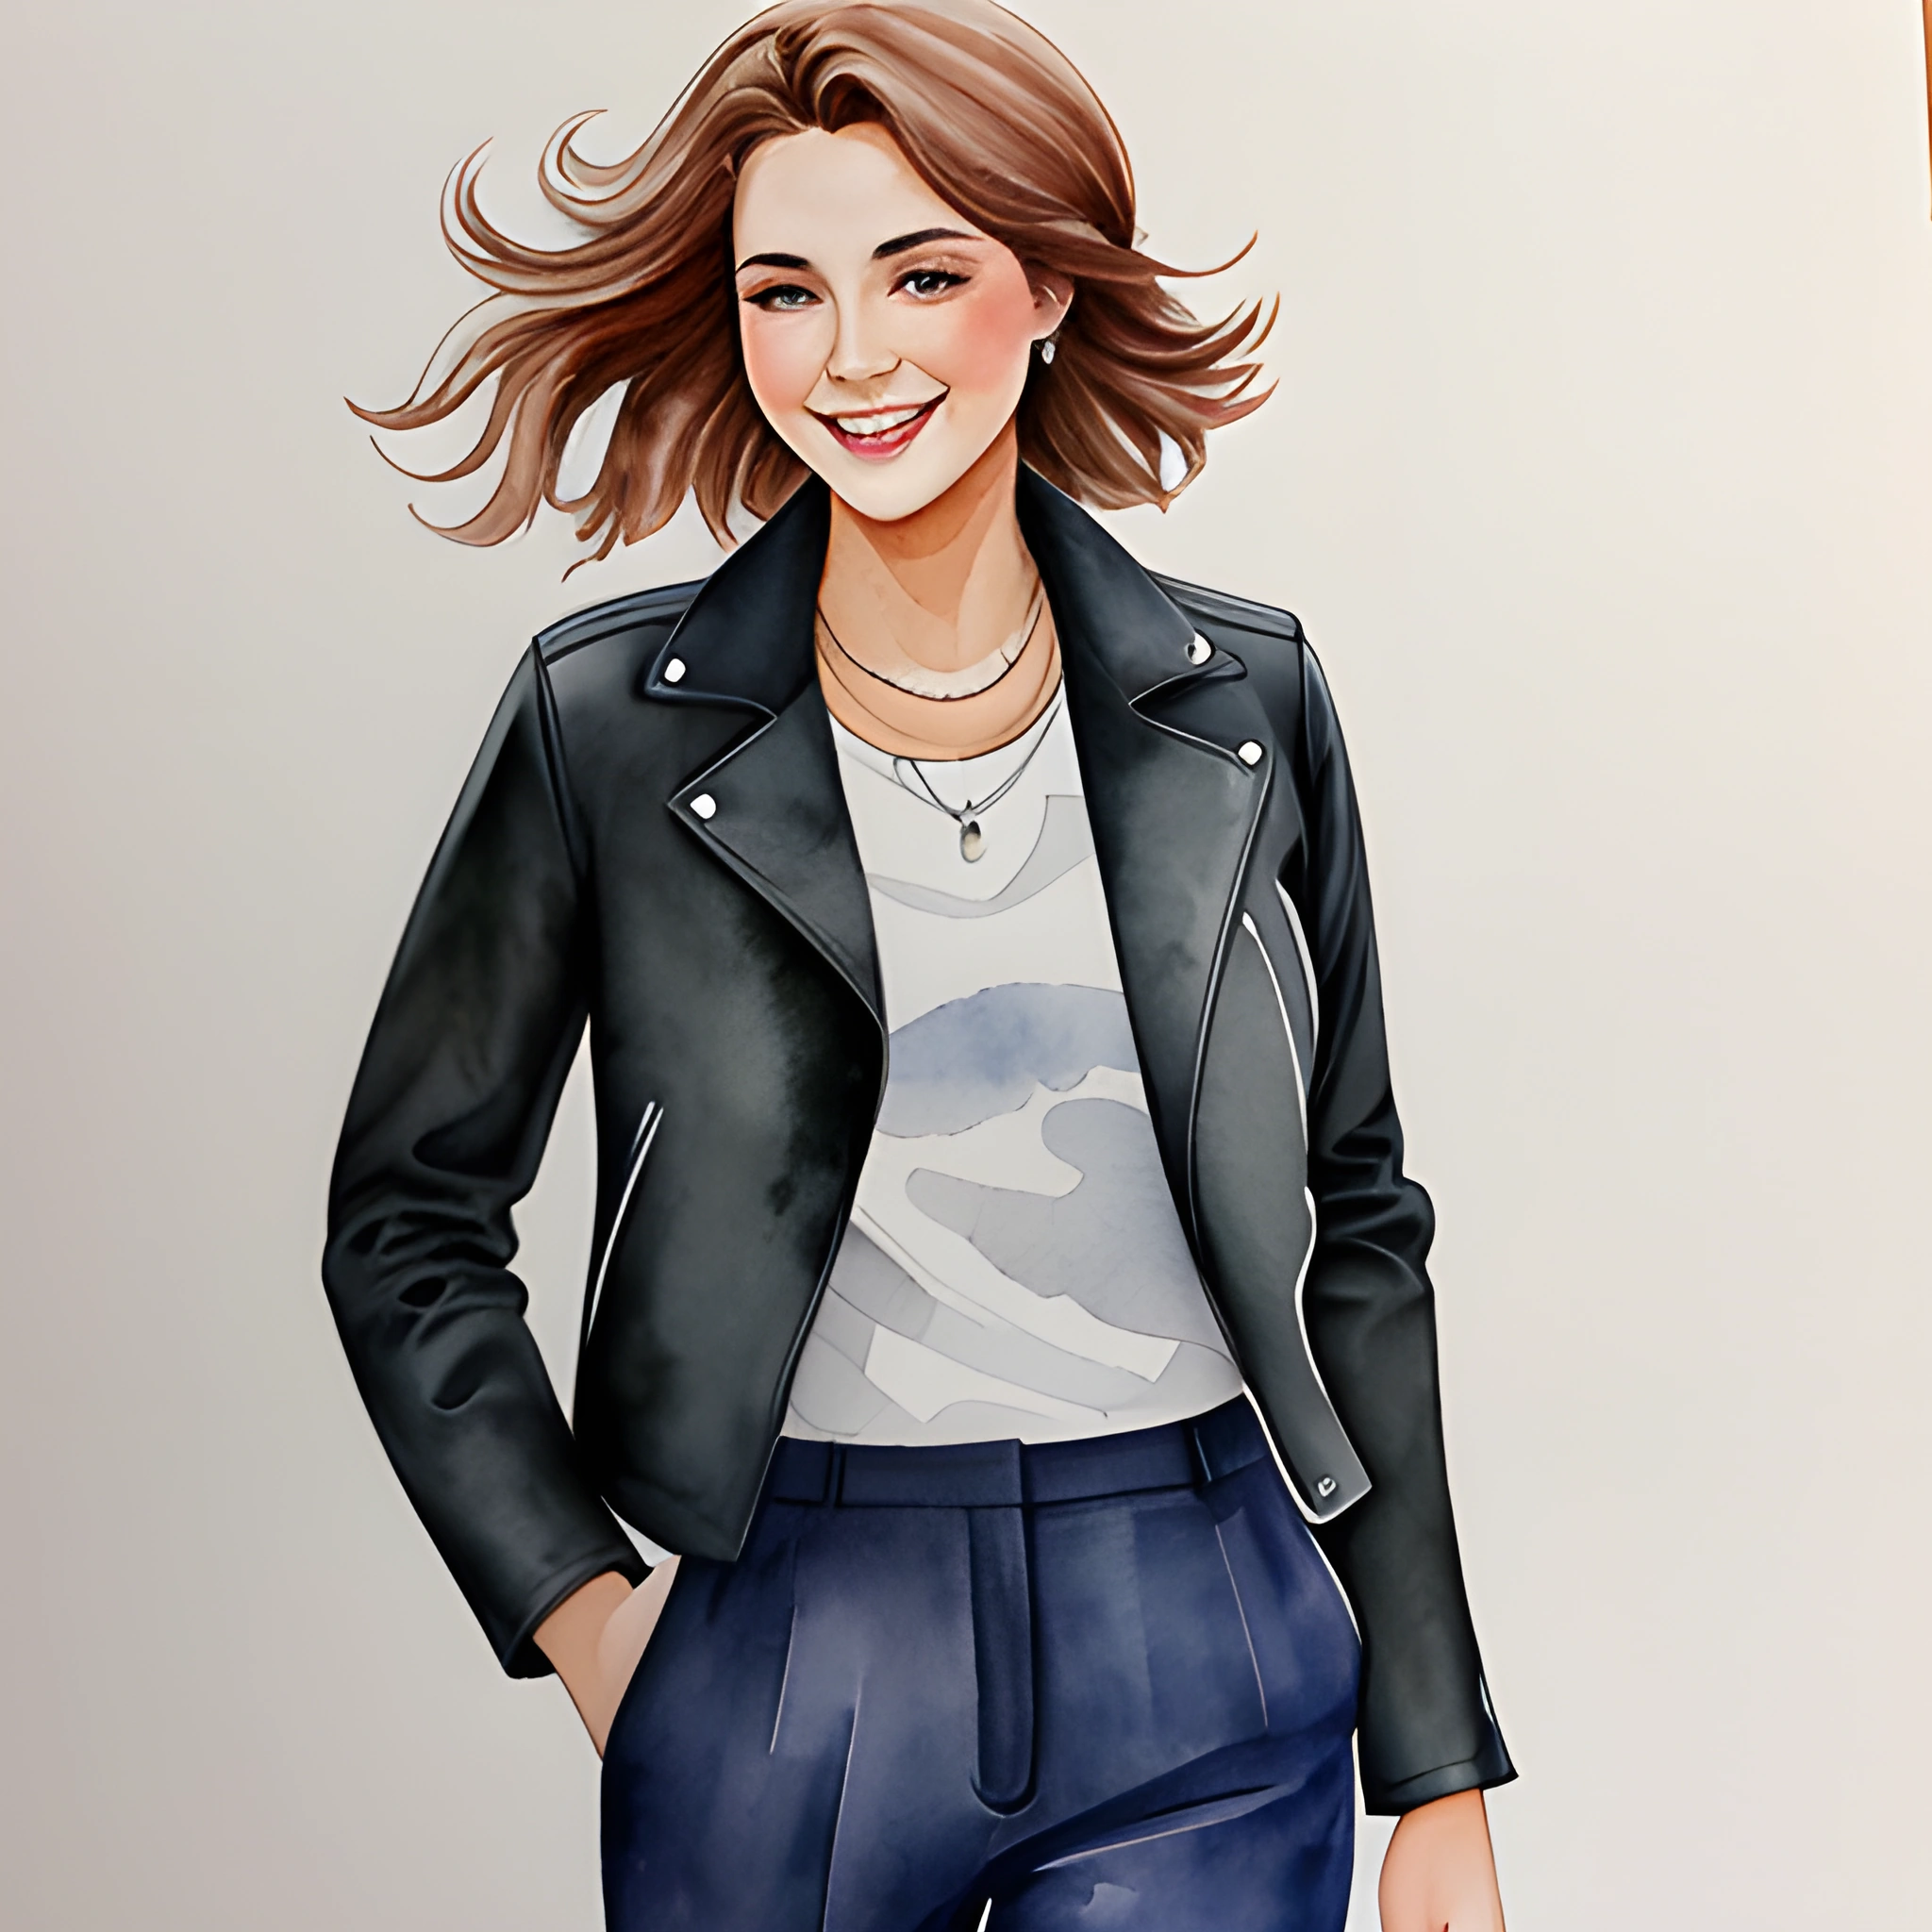 painting of a woman in a leather jacket and pants